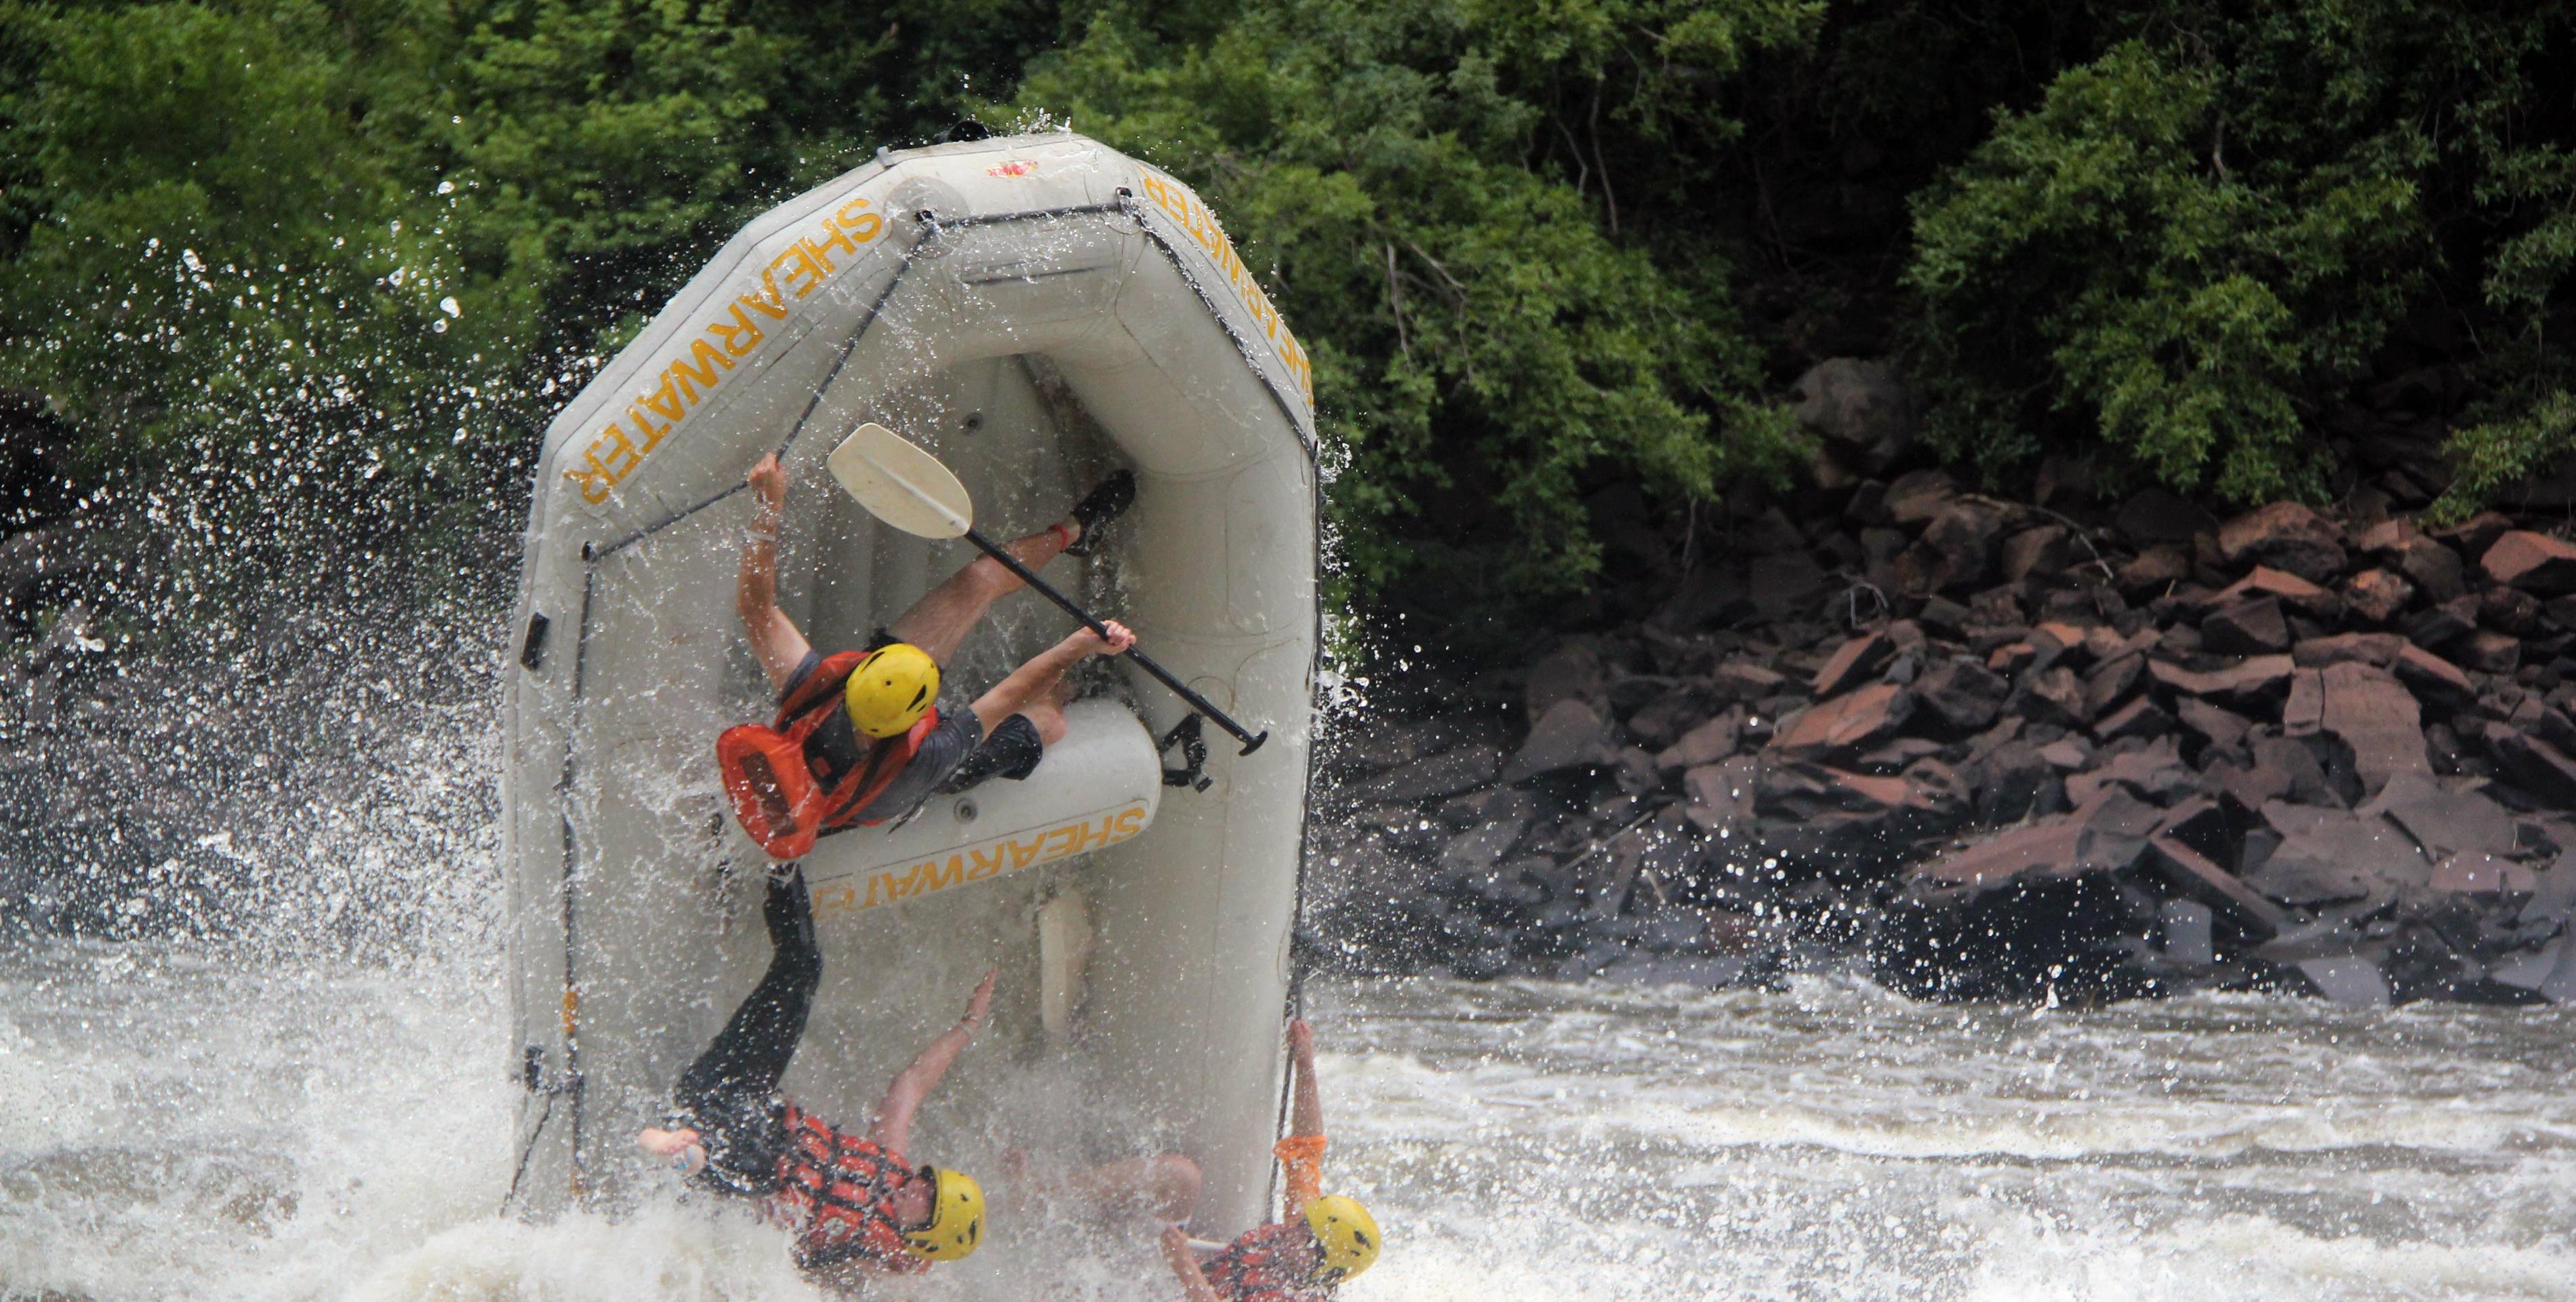 Adventure Pass Victoria Falls: Rafting and bungy jump